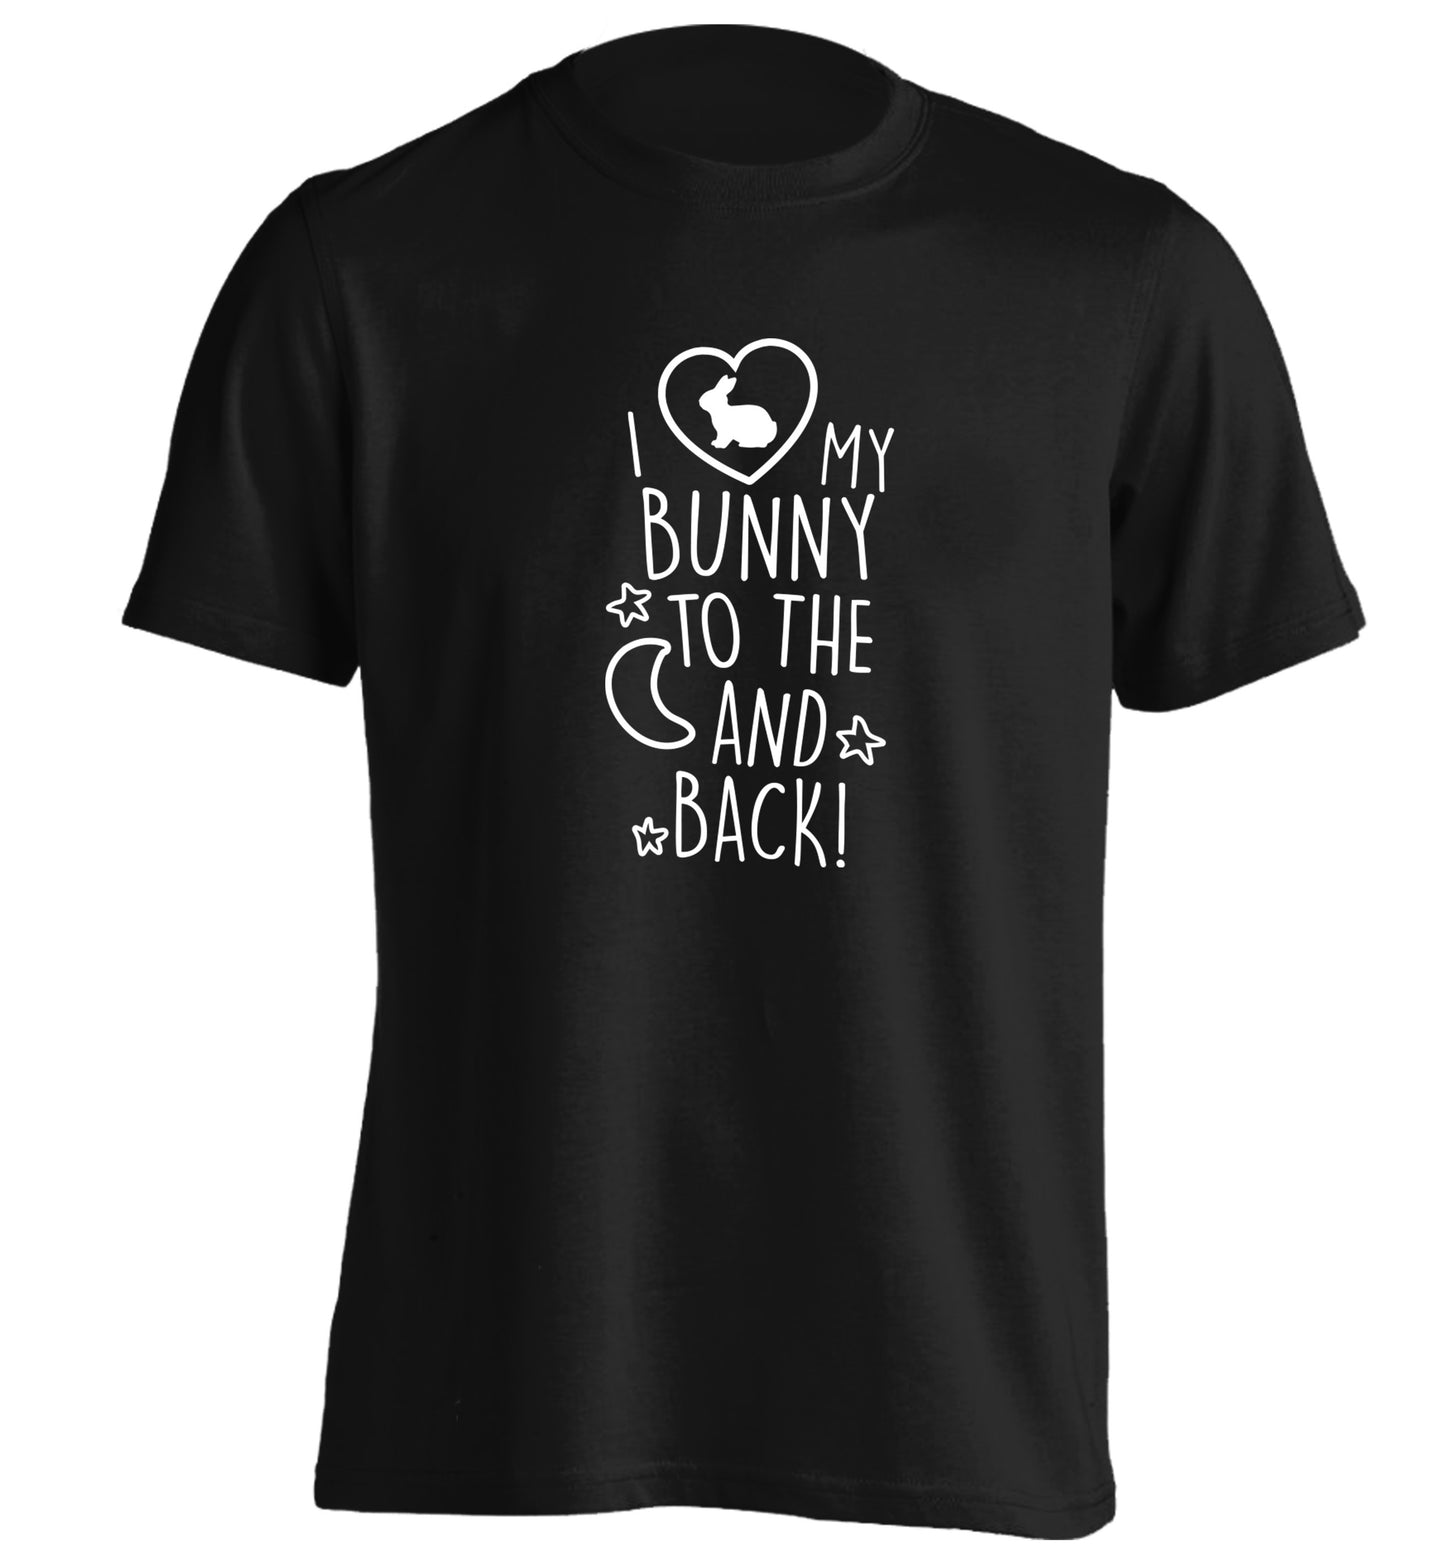 I love my bunny to the moon and back adults unisex black Tshirt 2XL